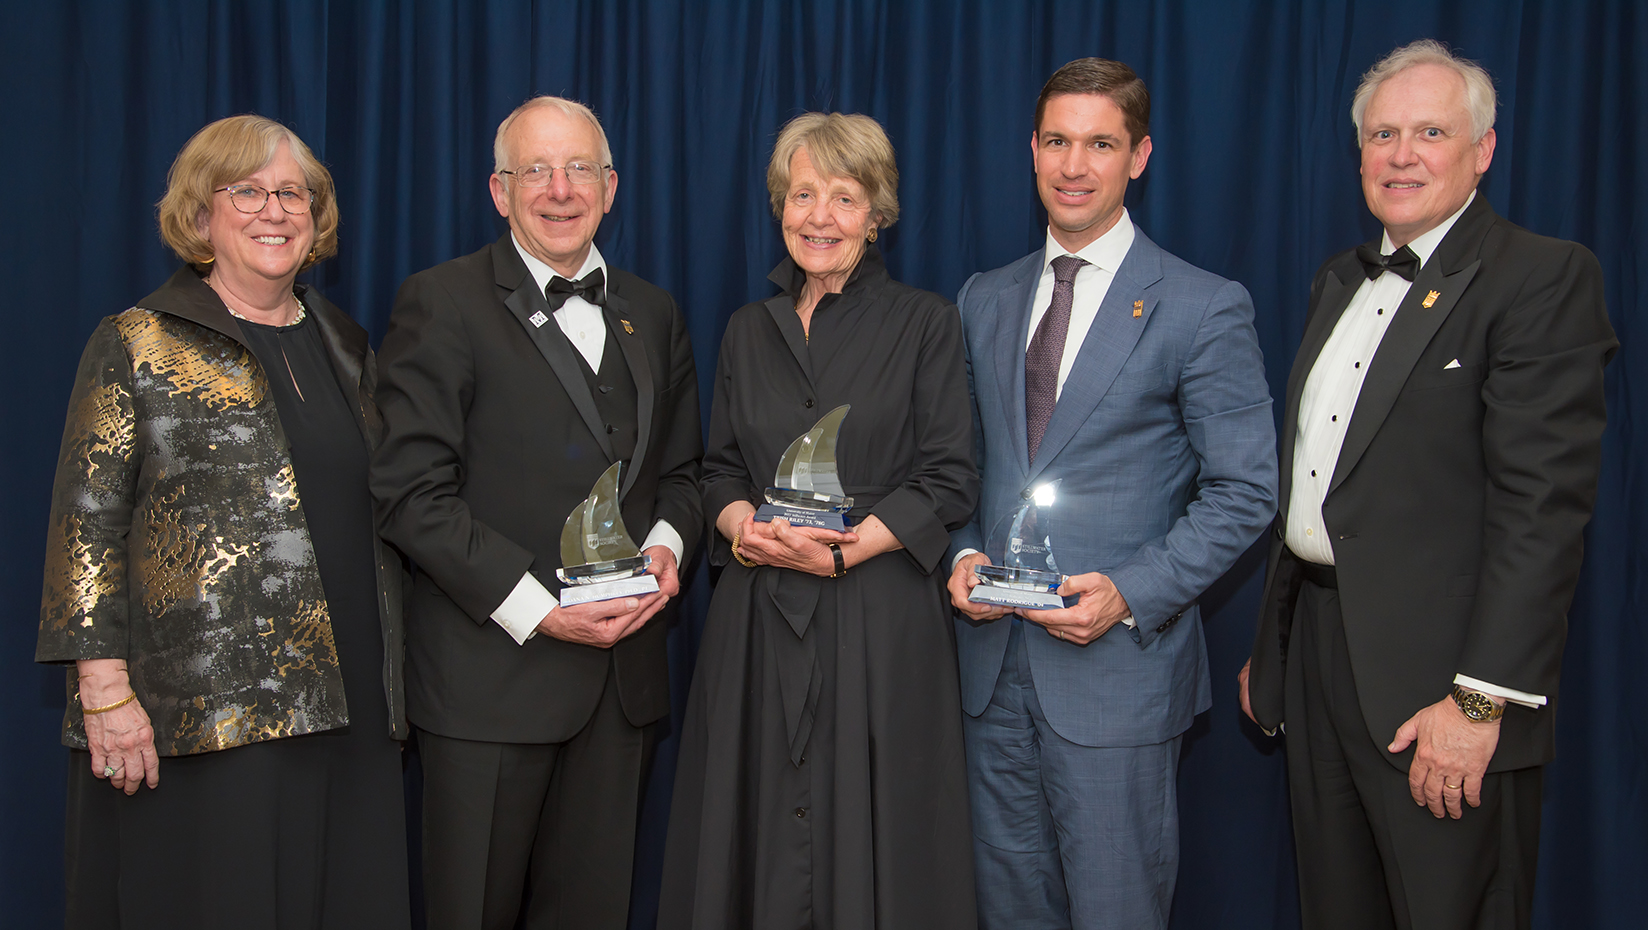 Three of UMaine’s best advocates honored at Stillwater Society Dinner